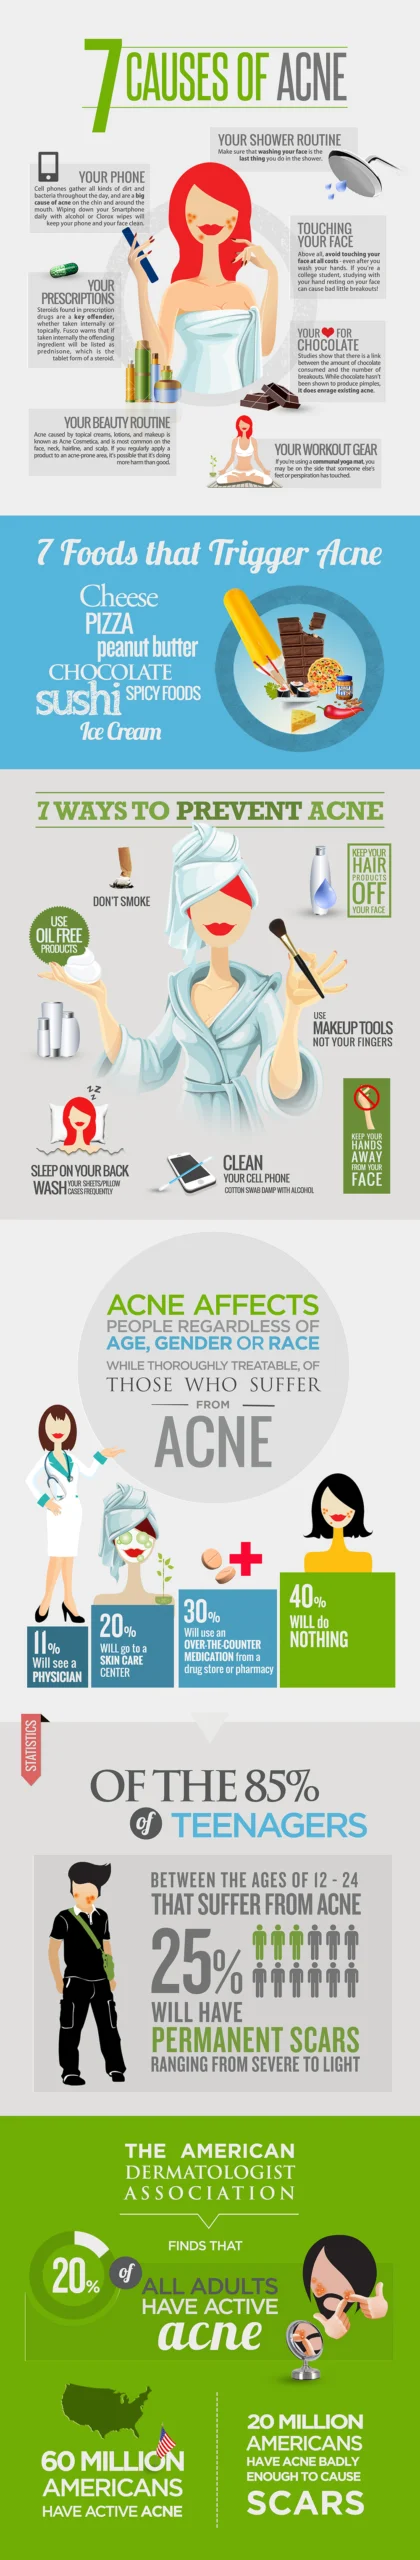 7 Causes And Foods That Can Trigger Your Acne [InfoGraphic]
